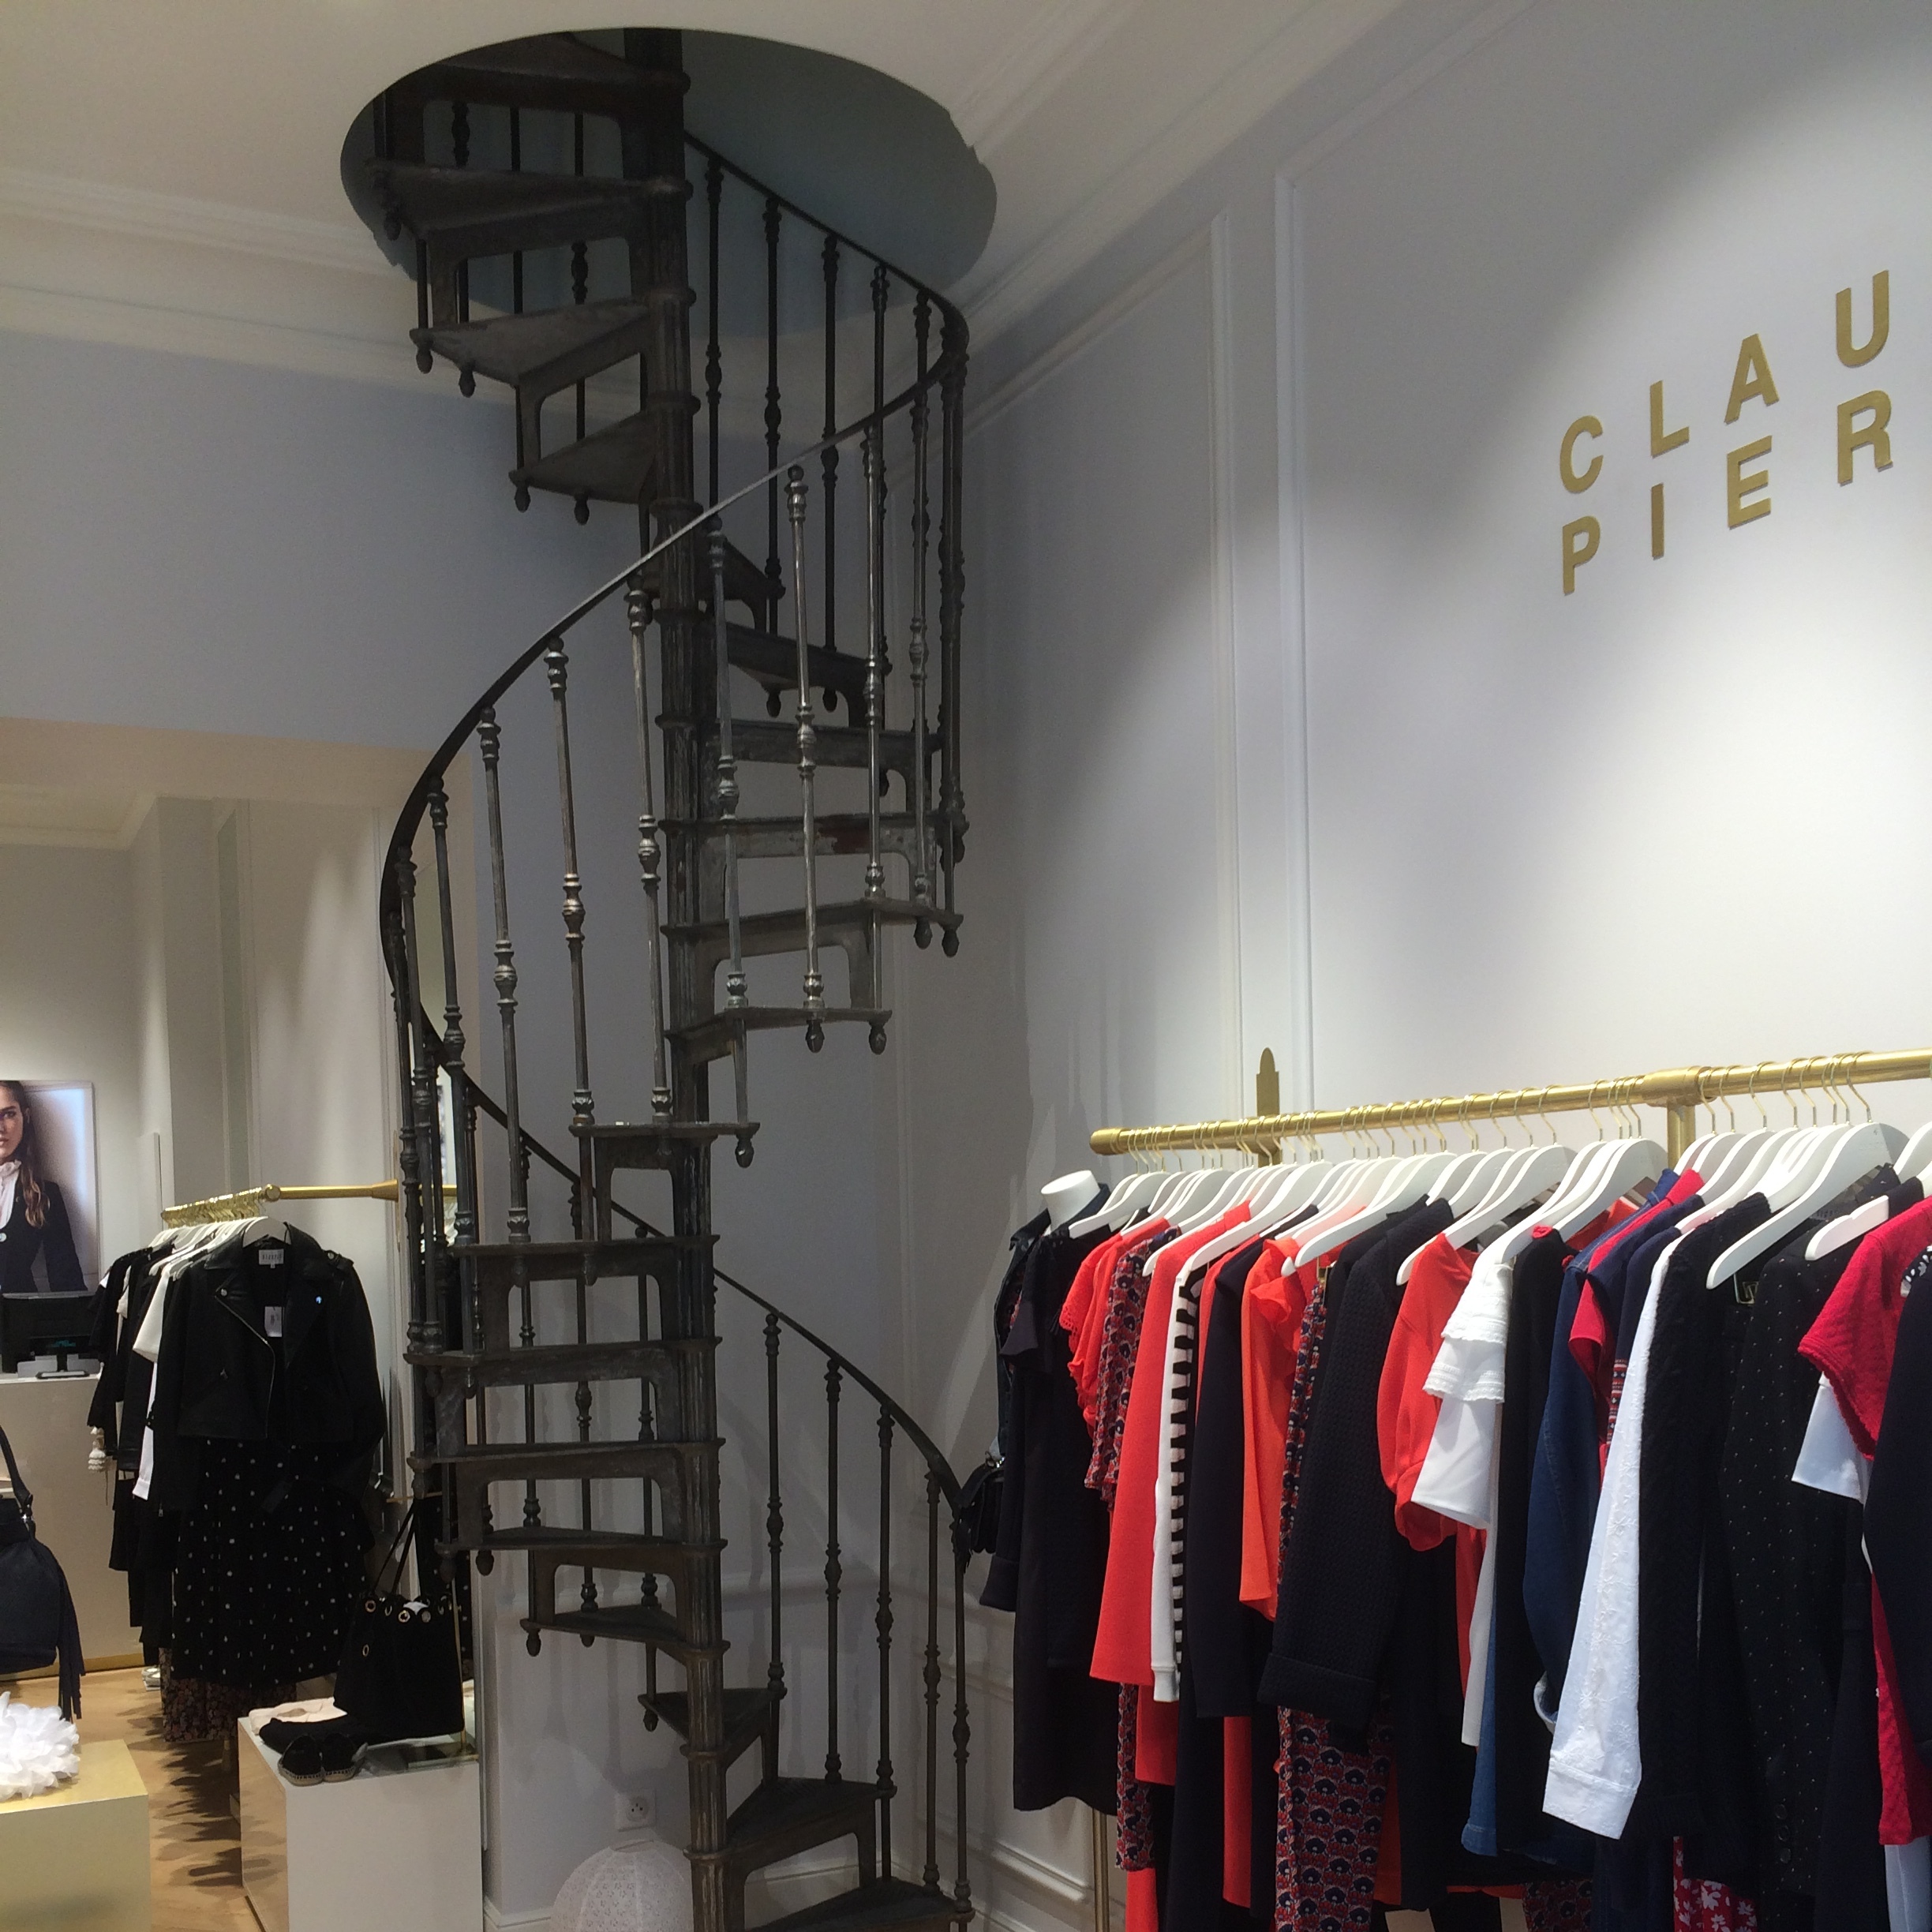 Spiral staircase model Mirecourt in the clothes shop Claudie Pierlot in Annecy (France)